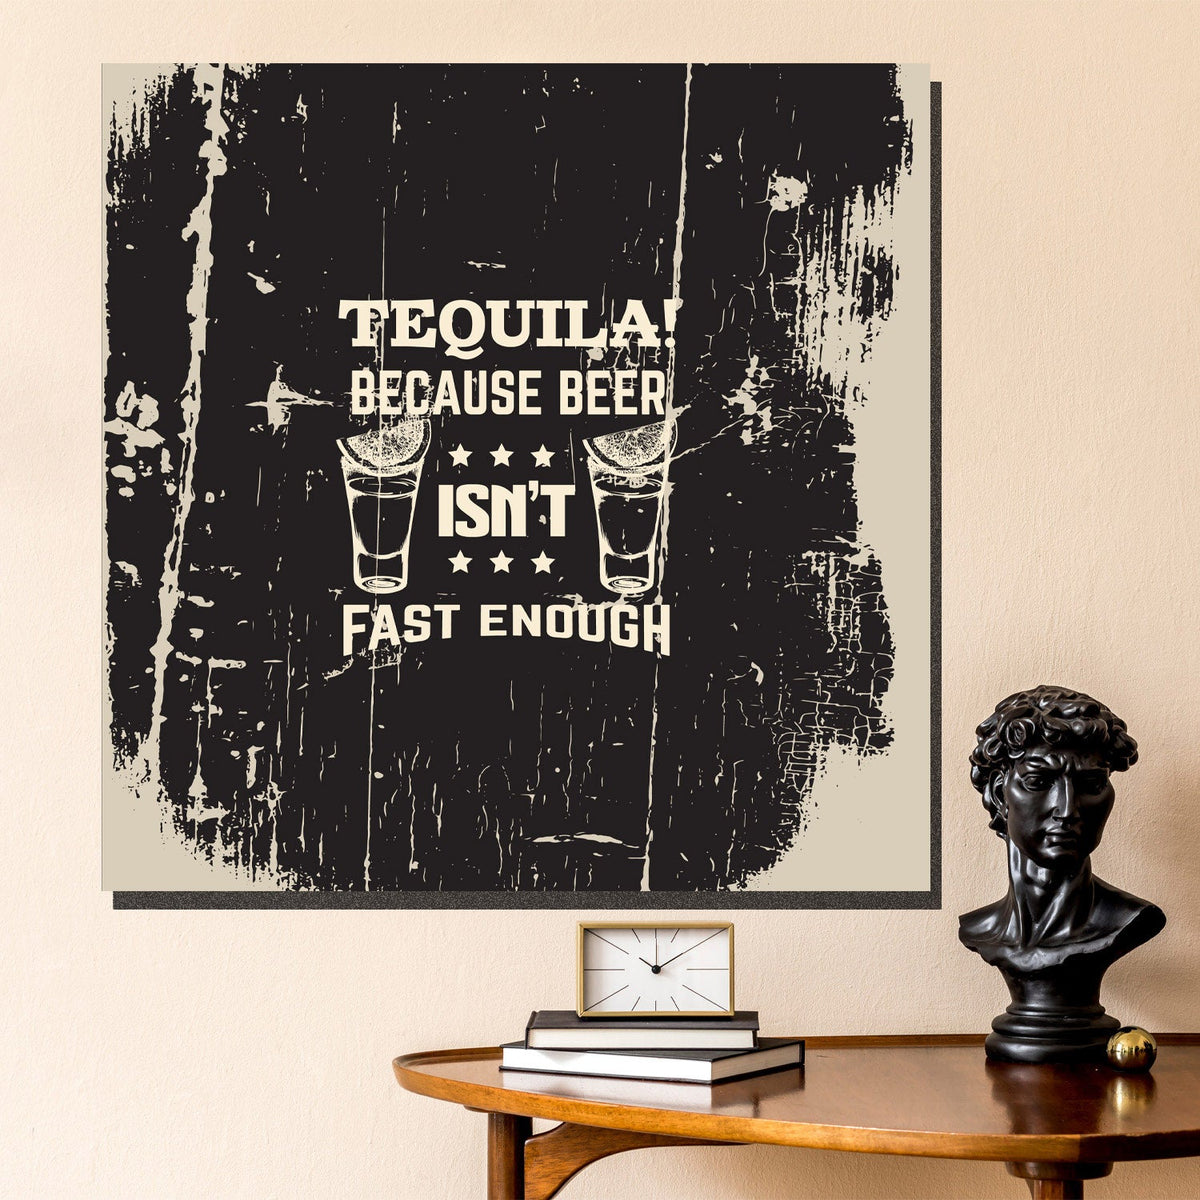 https://cdn.shopify.com/s/files/1/0387/9986/8044/products/TequilaBecauseCanvasArtprintStretched-1.jpg